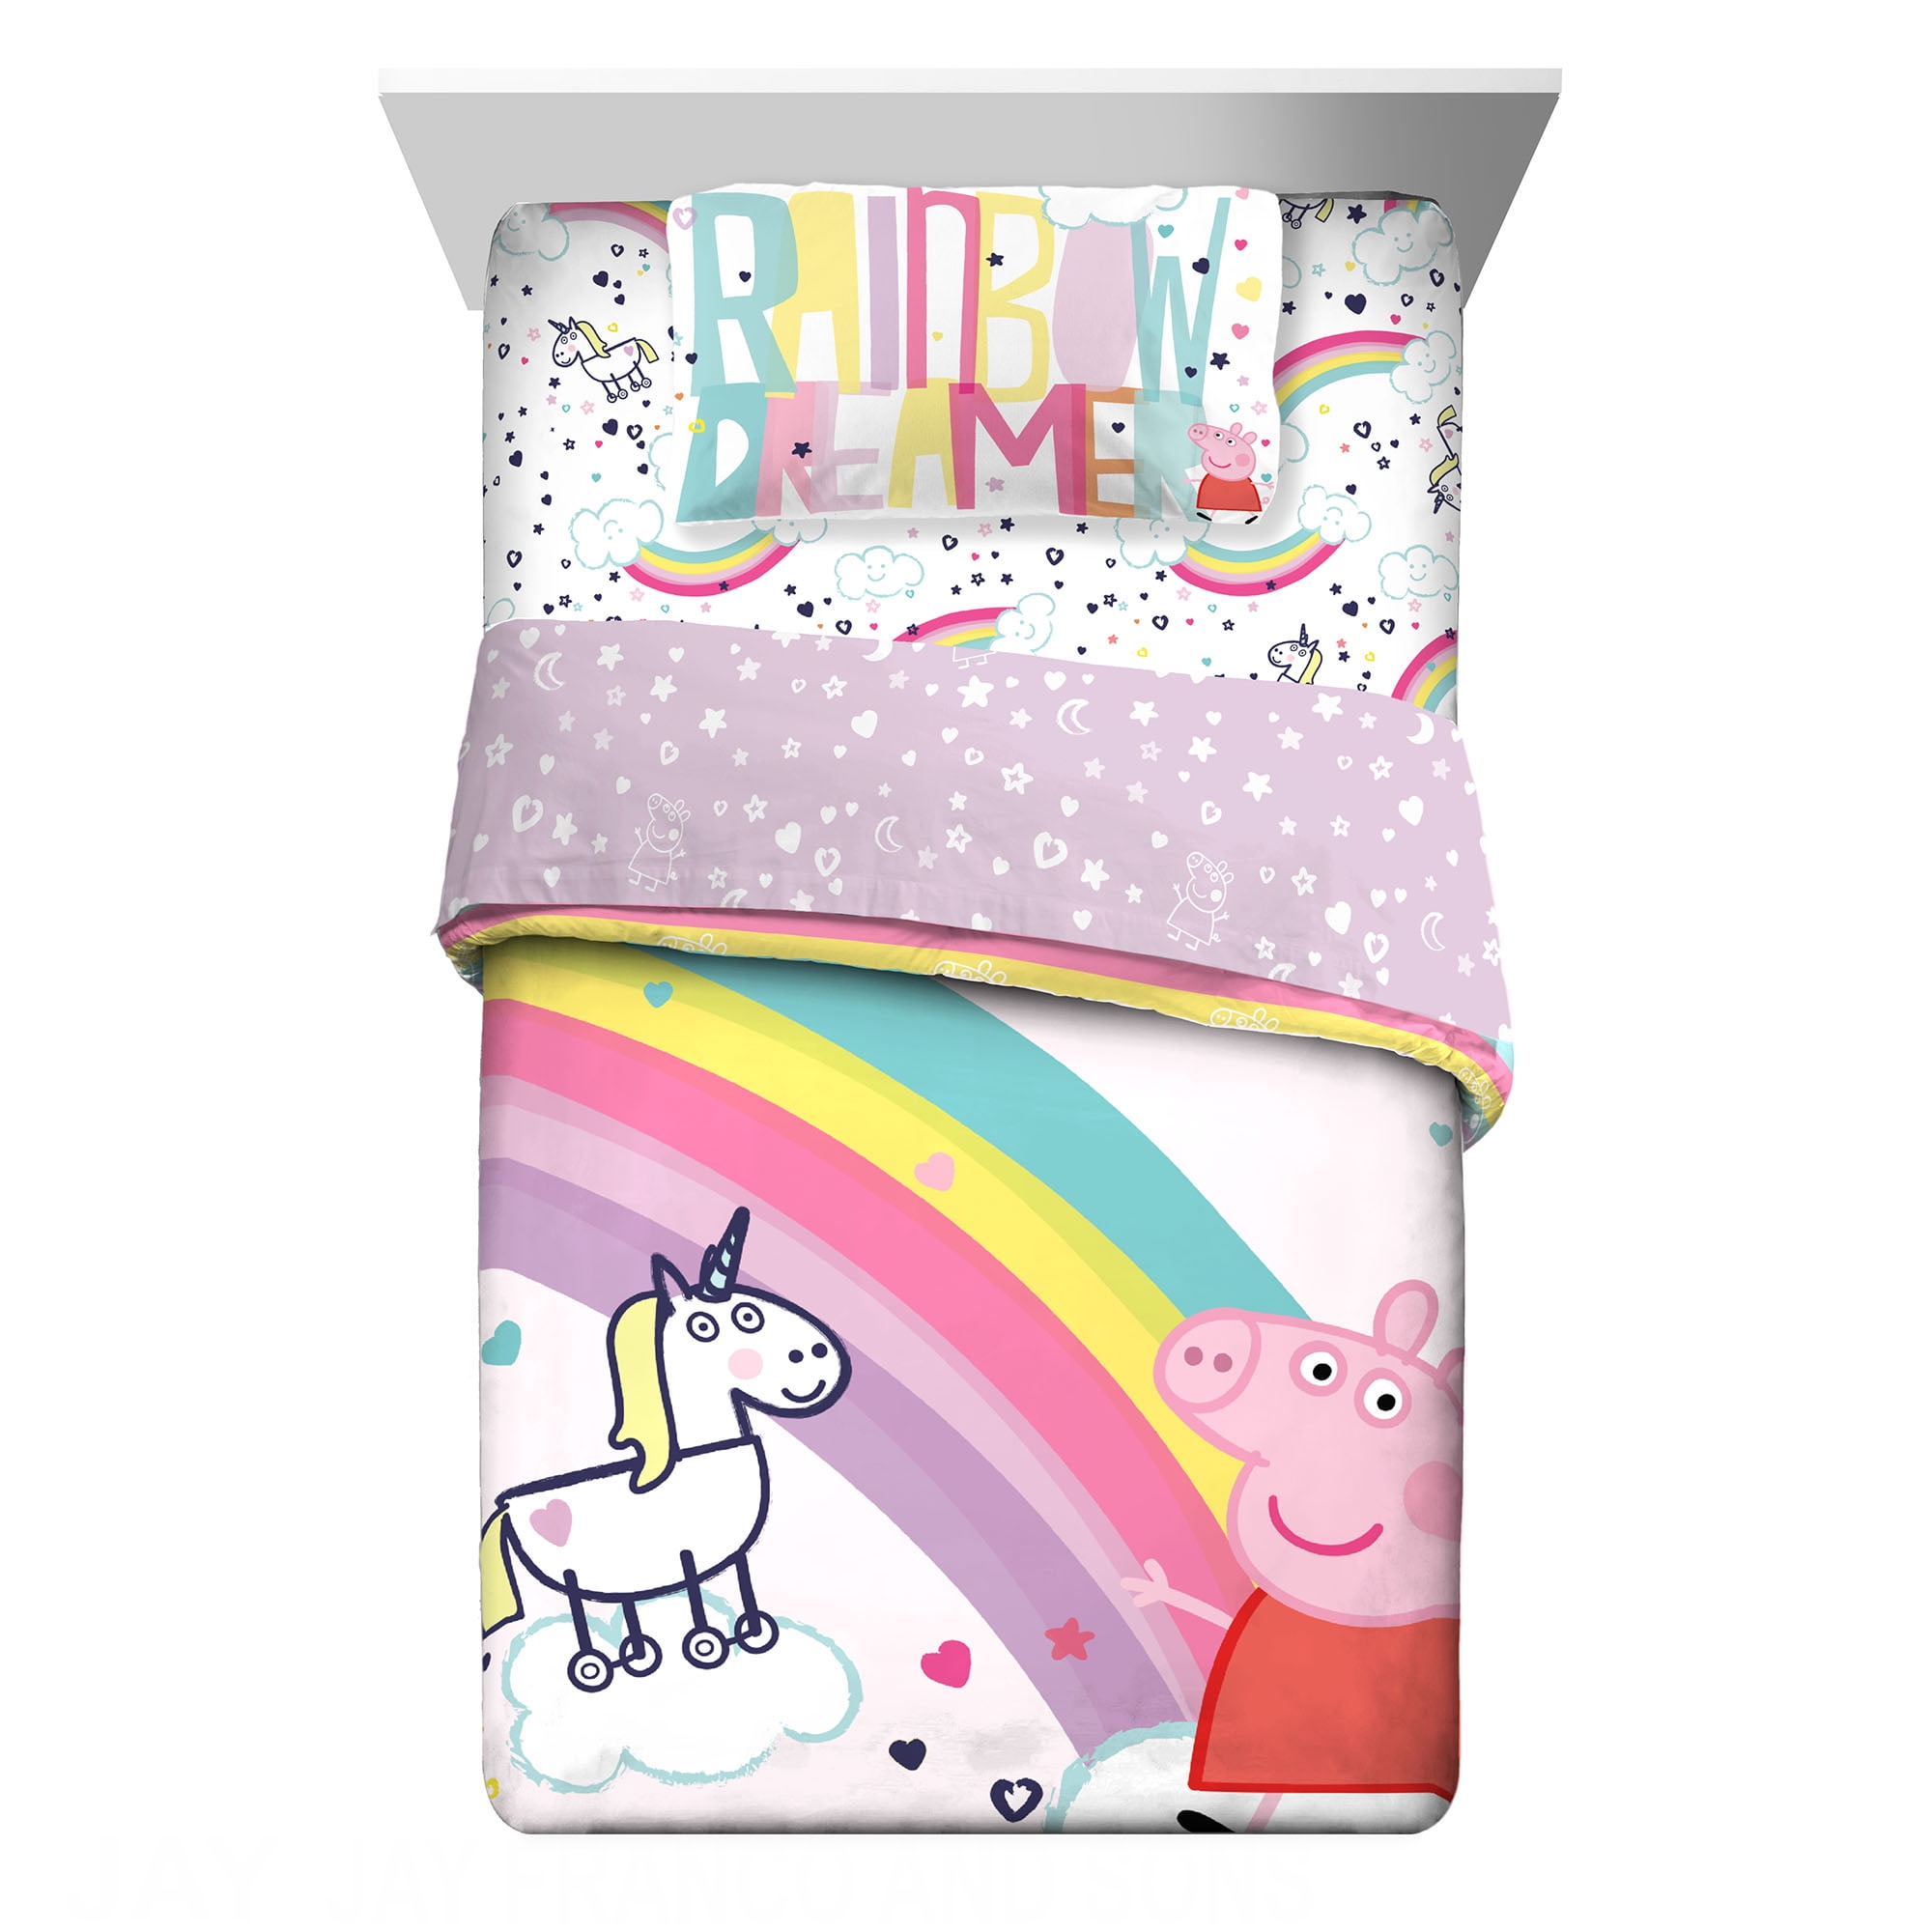 Peppa Pig on Pink Great Gift! Child Toddler Cot Pillowcase 100% Cotton 